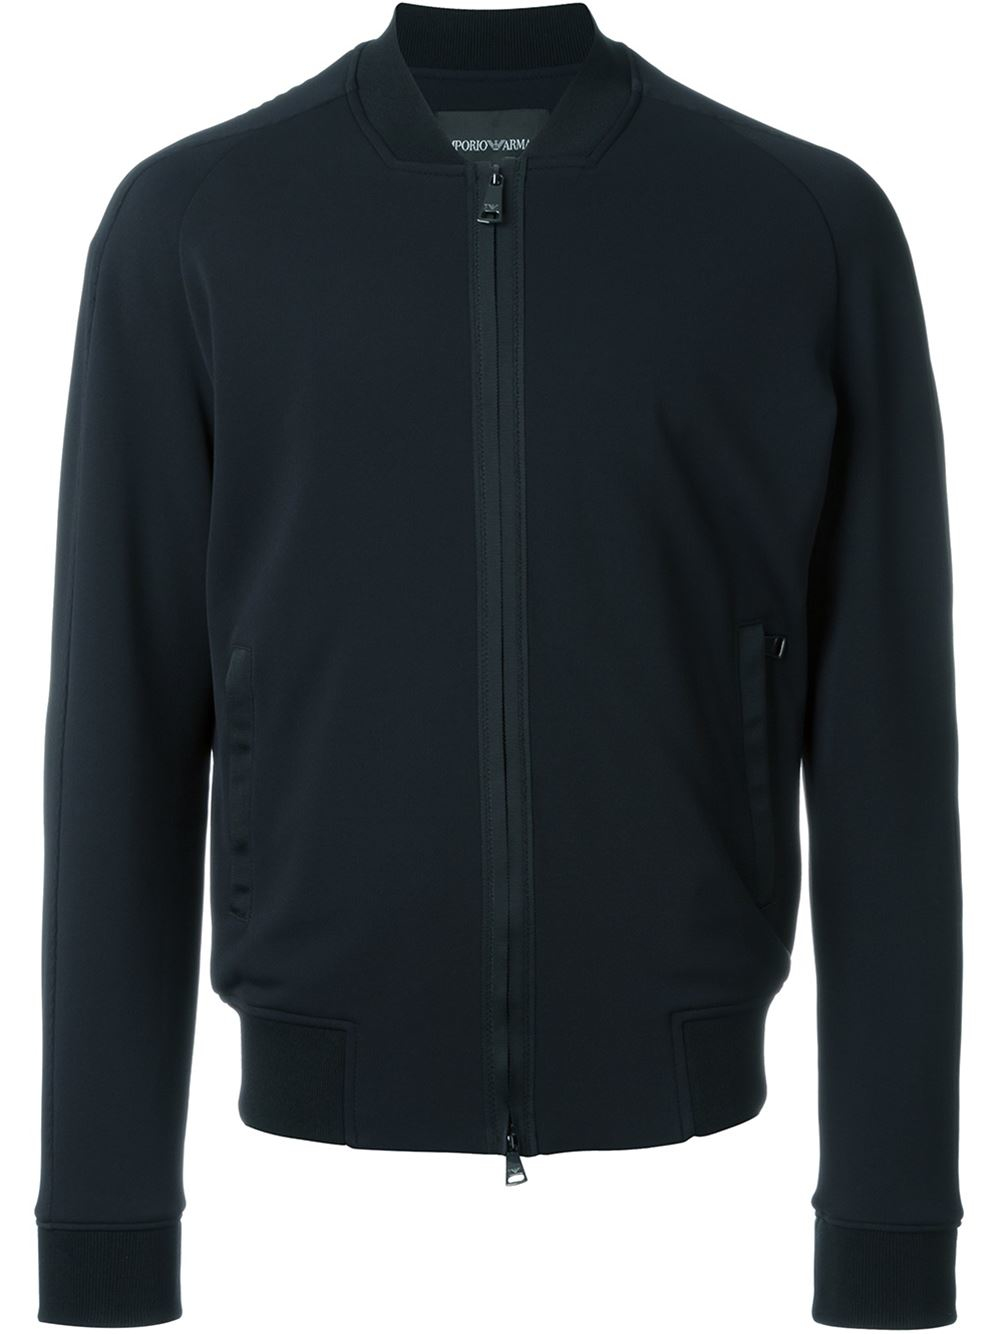 Lyst - Emporio armani Zipped Bomber Jacket in Black for Men